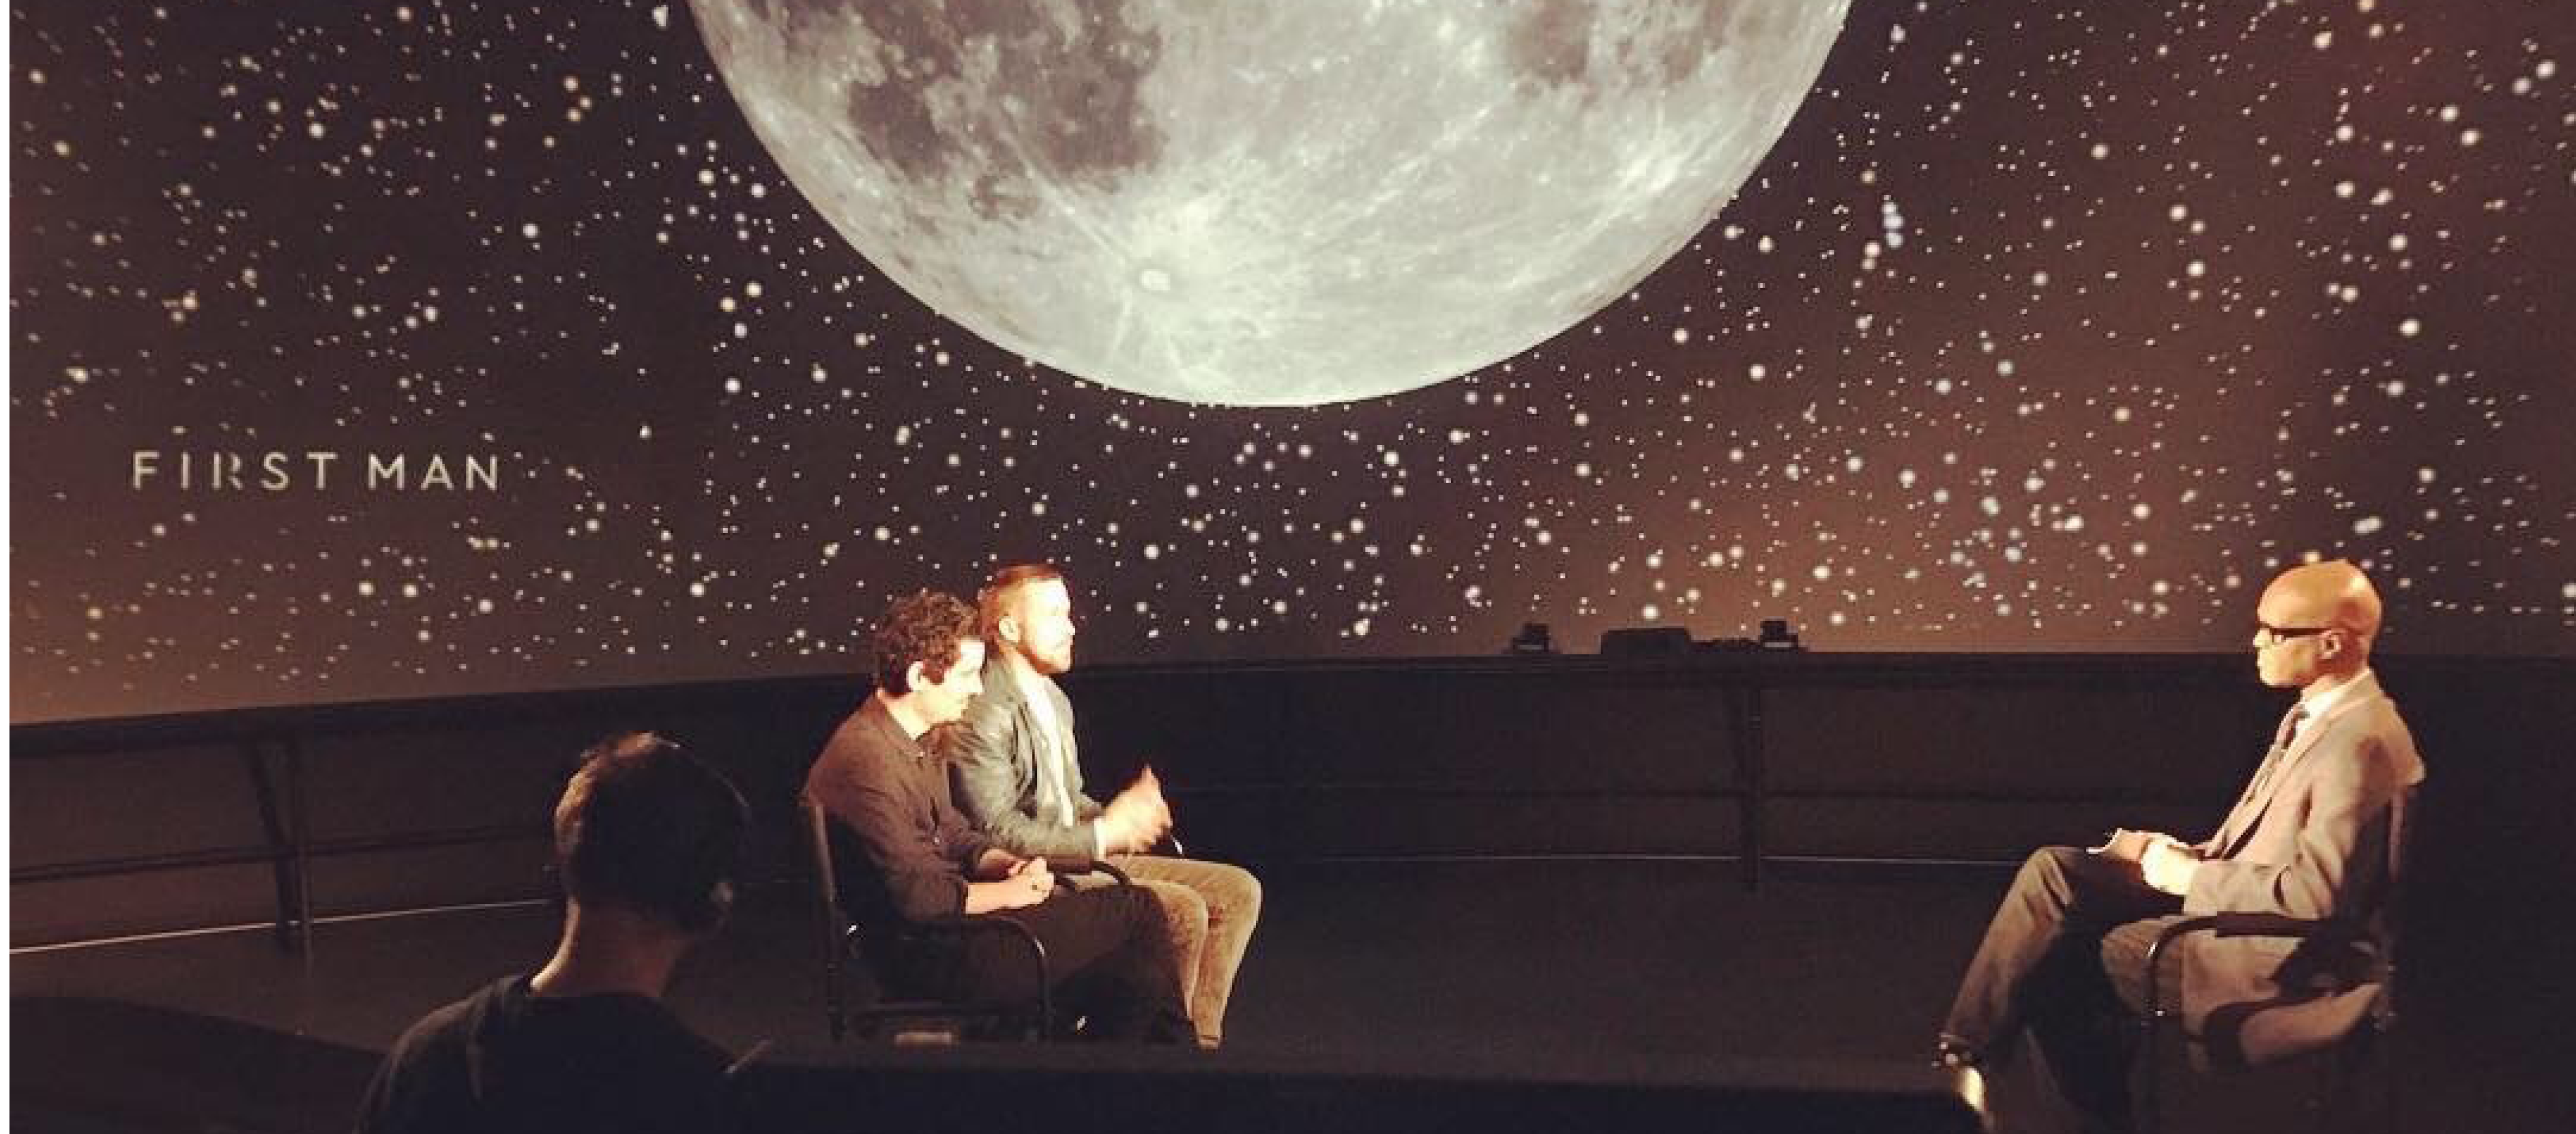 Grainger Sky Theater with Moon and stars projected onto the dome. Middle ground is award-winning actor, Ryan Gosling, and award-winning director, Damien Chazelle sitting across from a presenting african american male, bald with glasses, being interviewed by a reporter for the press junket of First Man in October 2018. Sound assistant can be seen in the foreground.